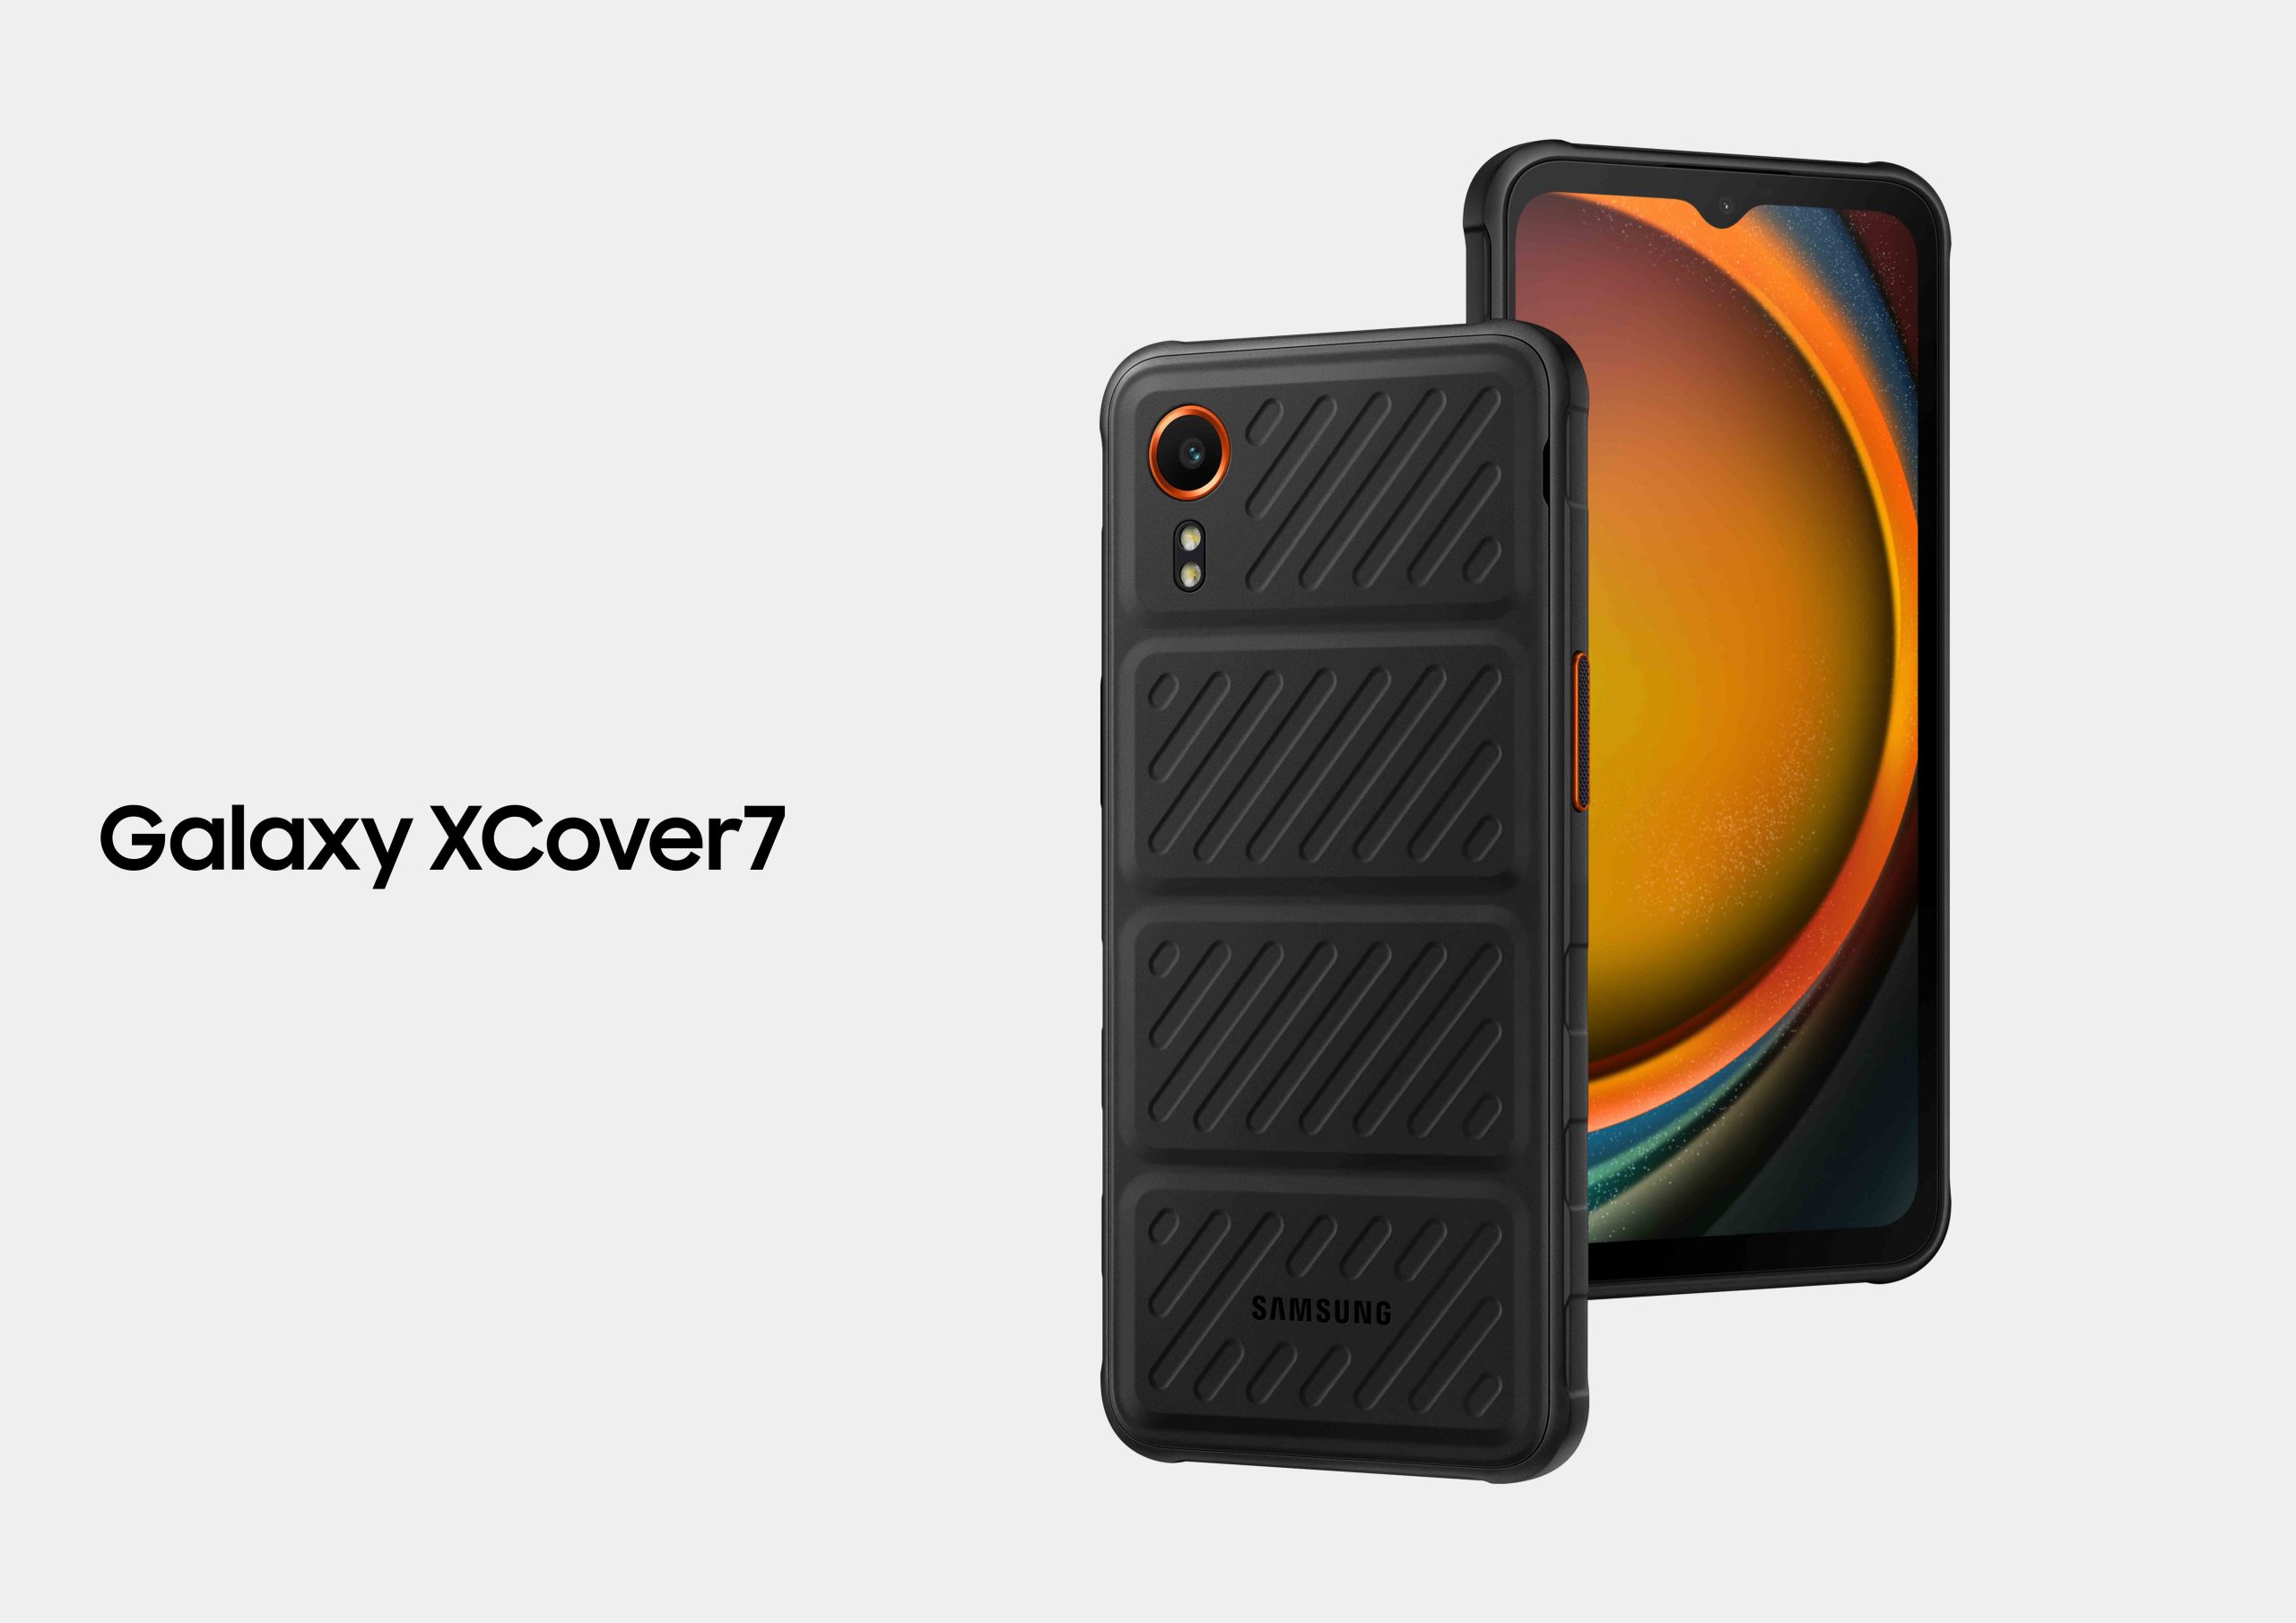 Samsung Galaxy XCover7: Pricing and Availability